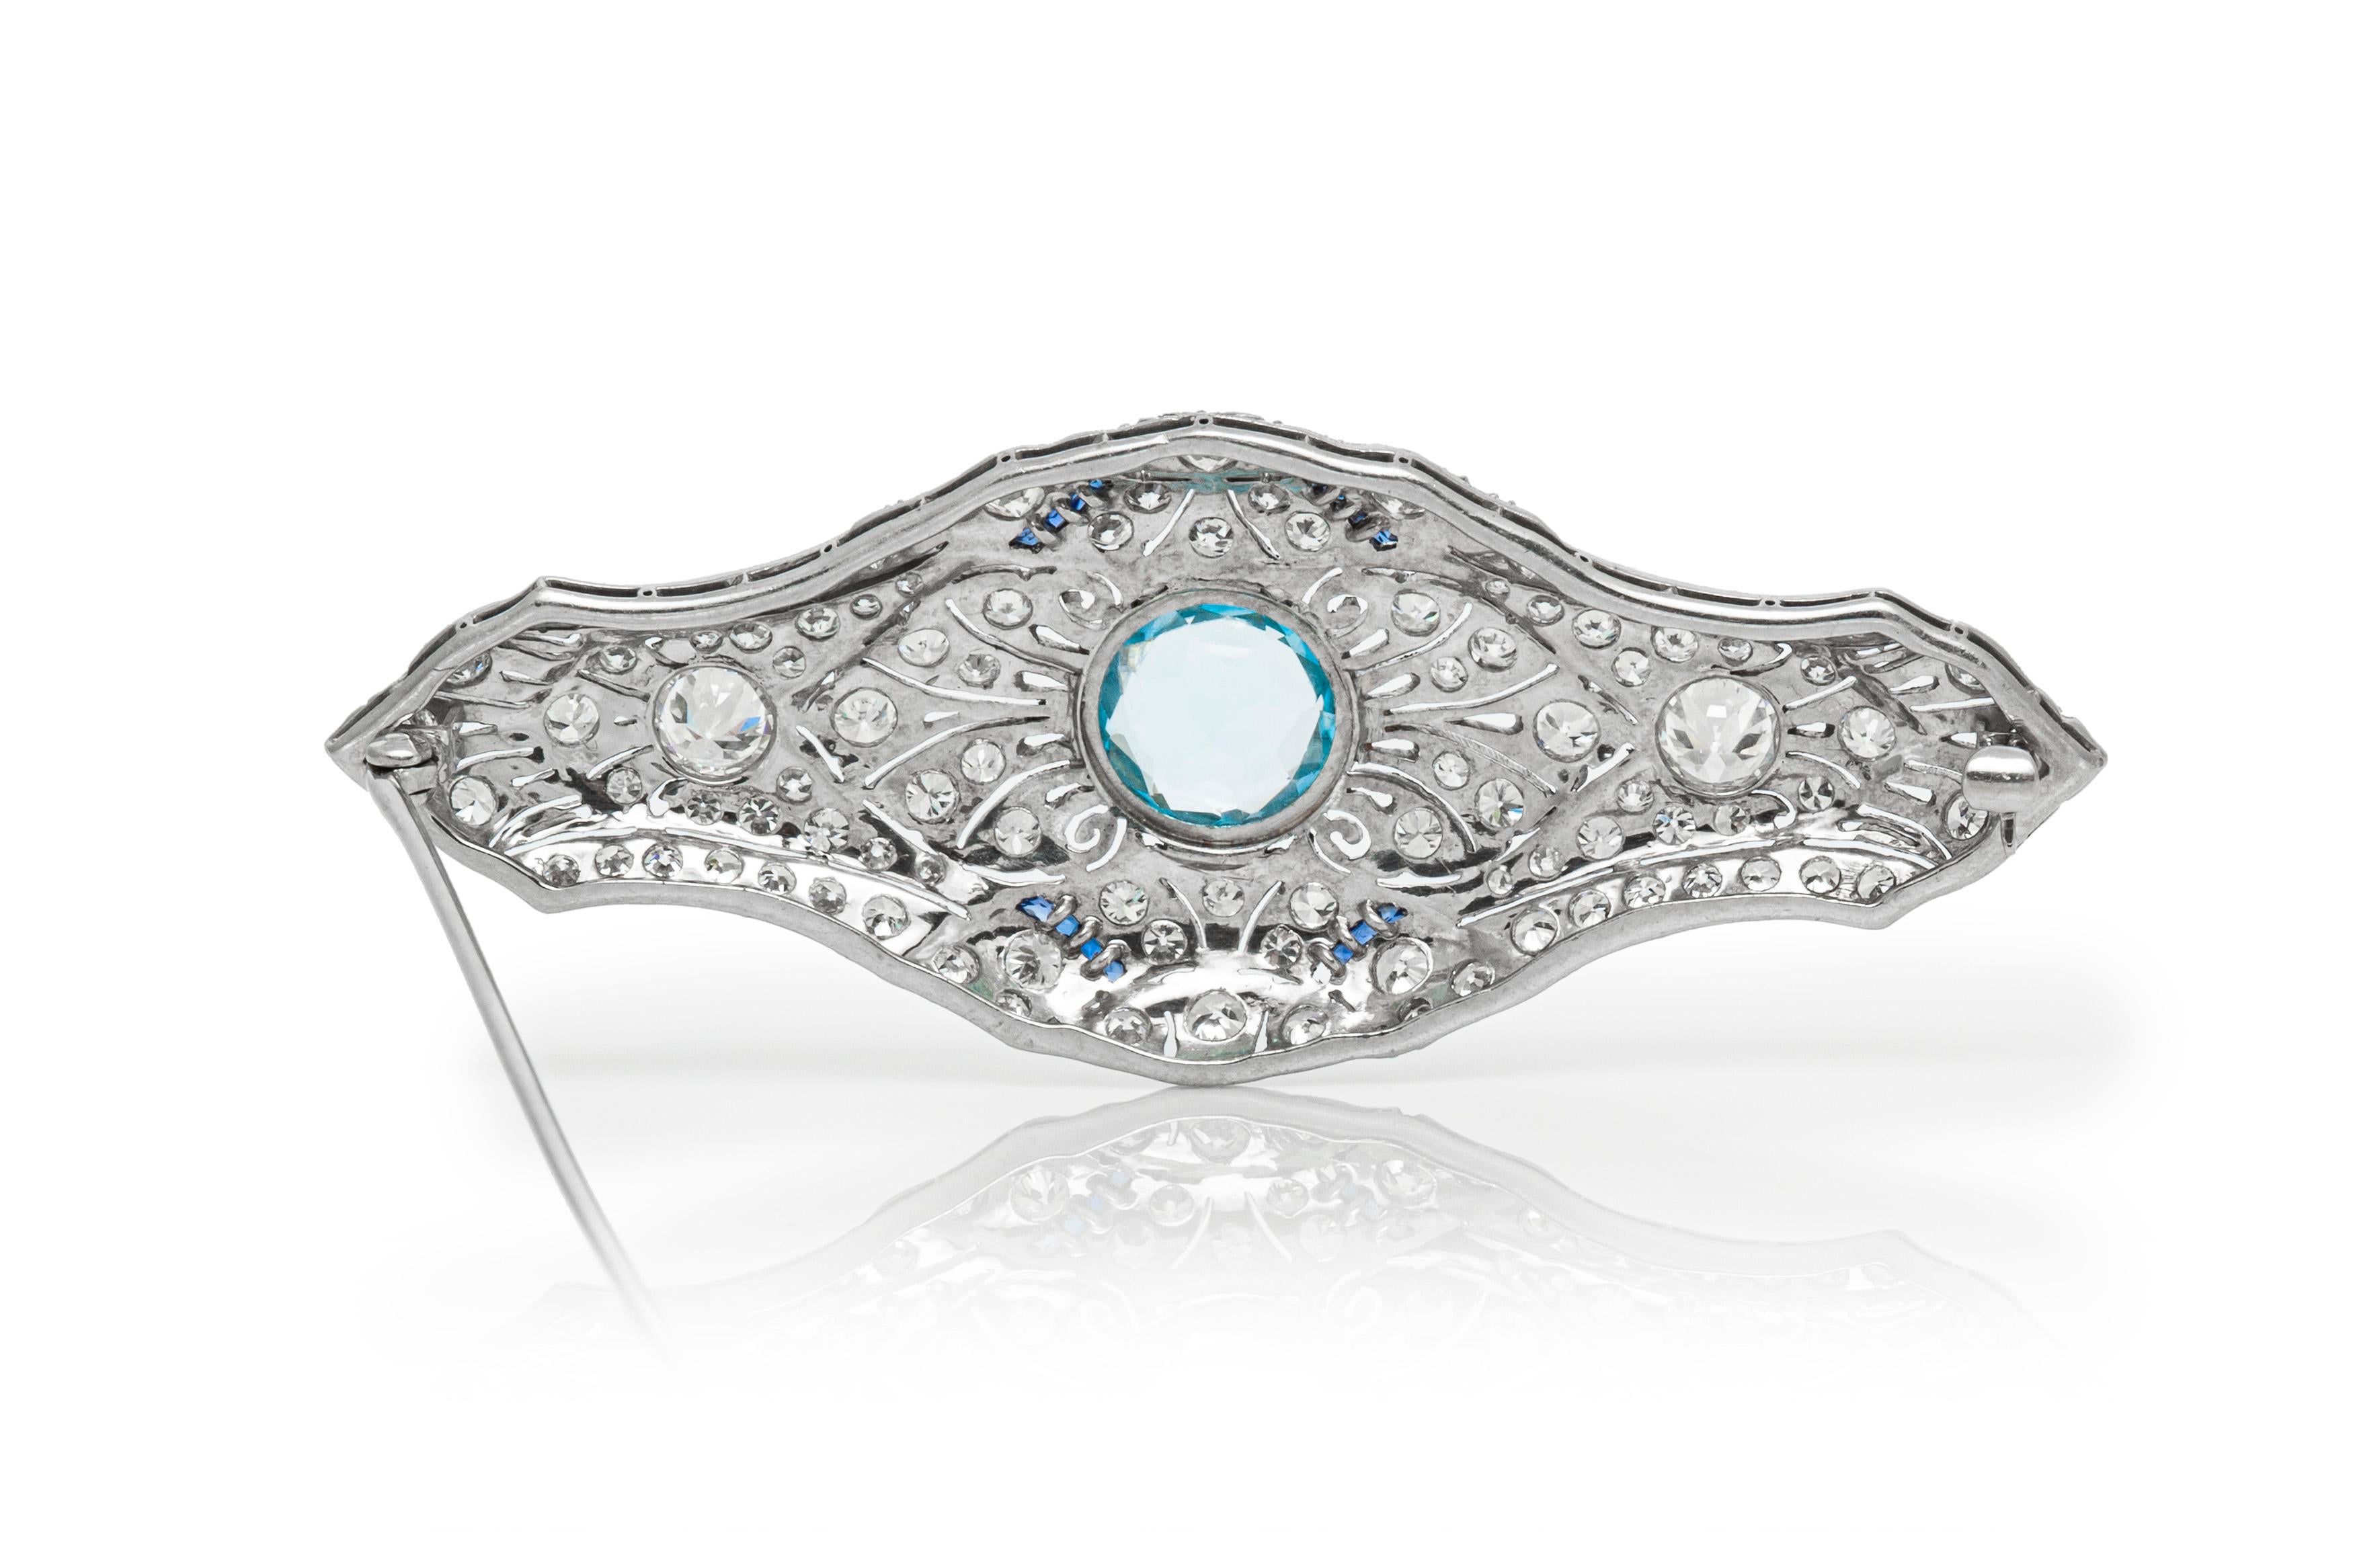 The brooch is finely carfted in platinum with diamonds weighing approximately total of 7.00 carat and aqua marine weighing approximately total of 6.00 carat and sapphire.